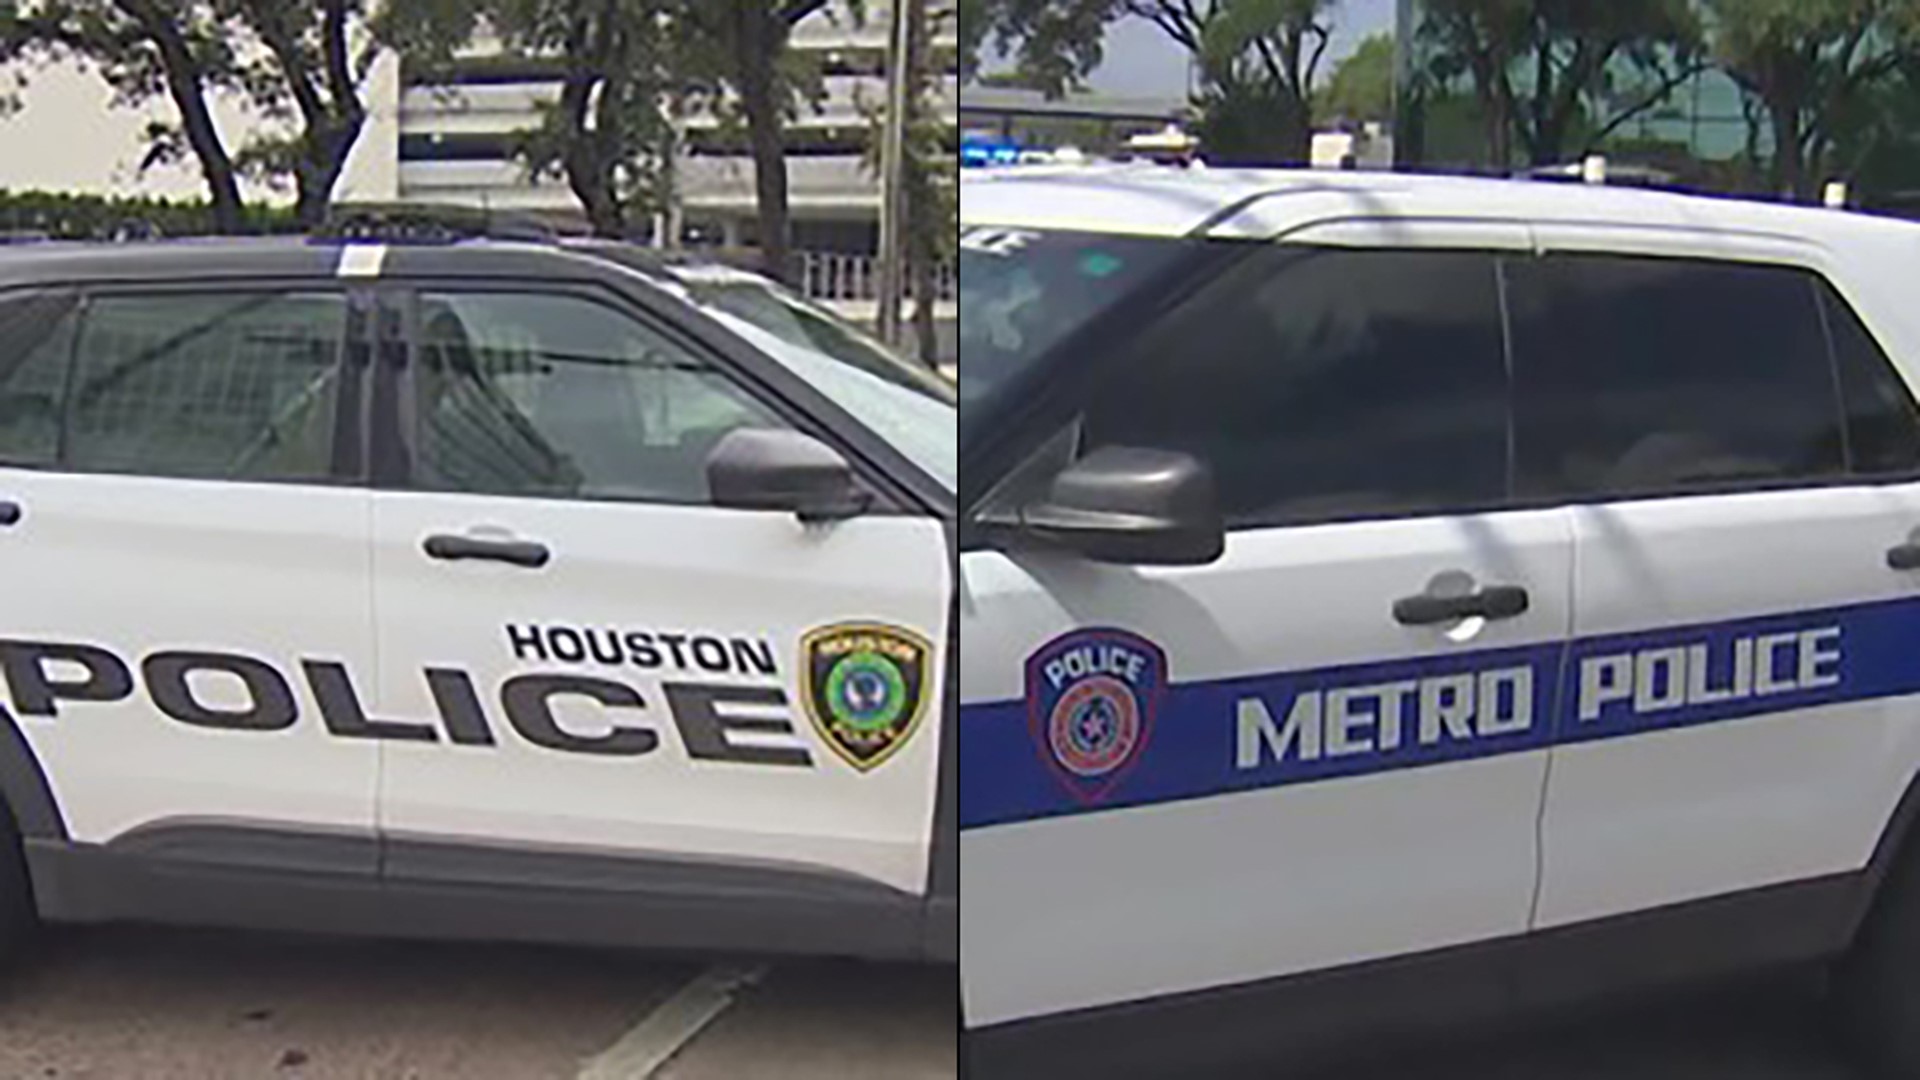 The proposal is in the early stages but it would add around 300 officers to the Houston Police Department.